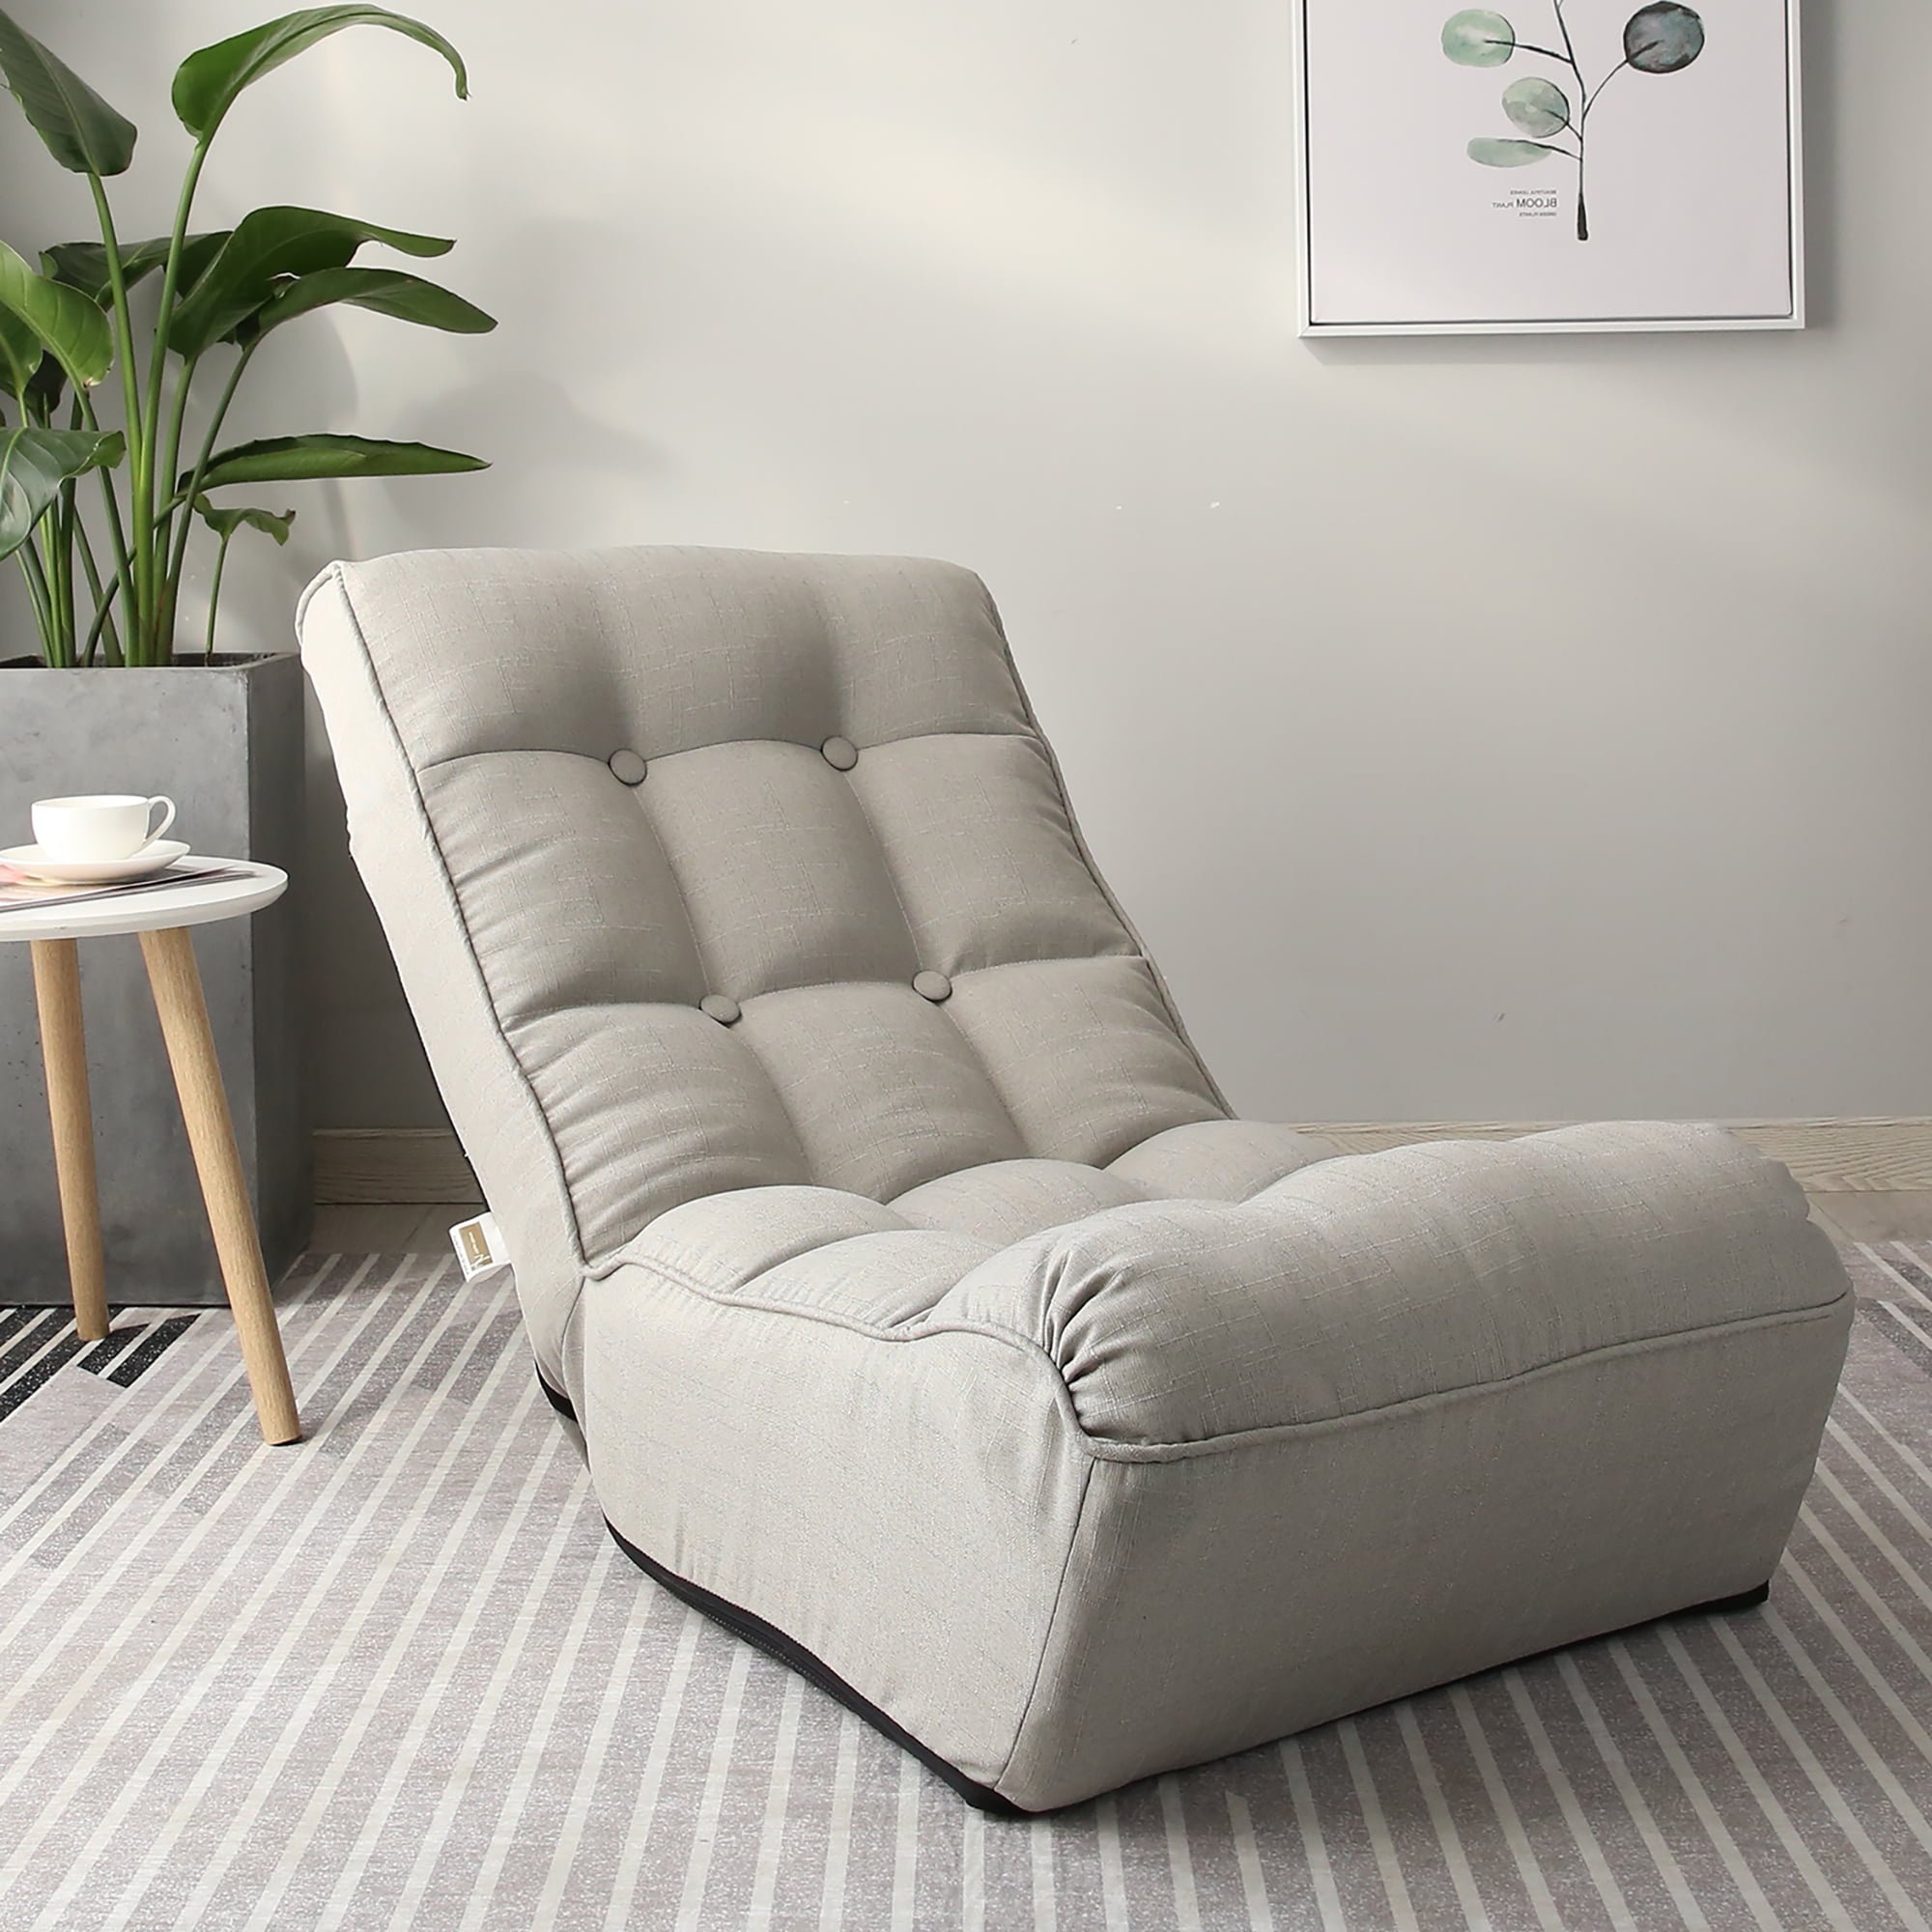 Details about   Micozy Casual Single Sofa With Adjustable Backrest Swivel and Removable Legs 